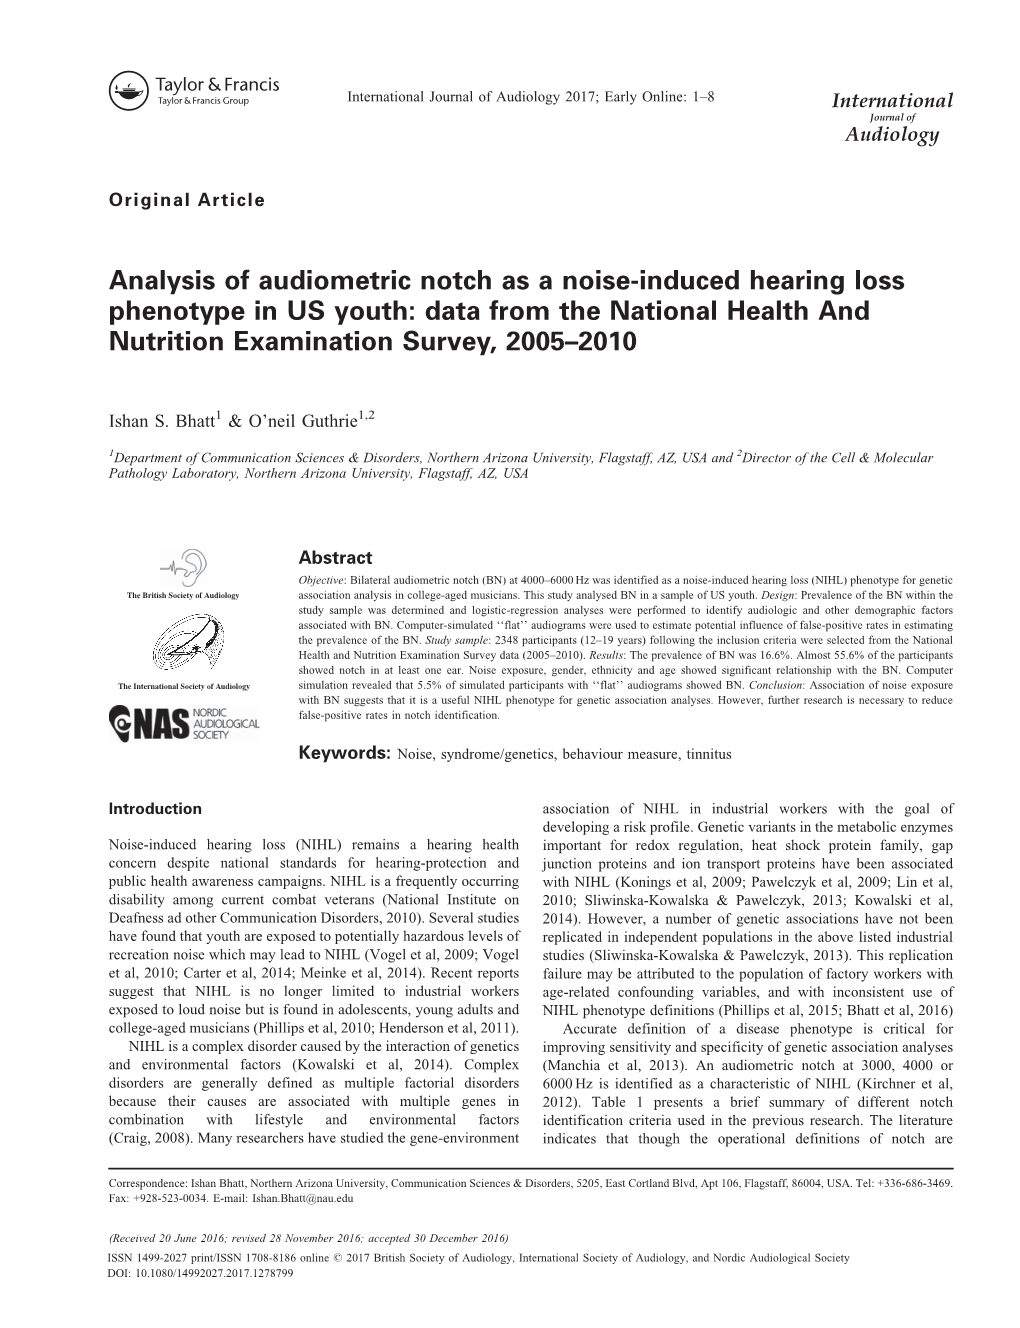 Analysis of Audiometric Notch As a Noise-Induced Hearing Loss Phenotype in US Youth: Data from the National Health and Nutrition Examination Survey, 2005–2010